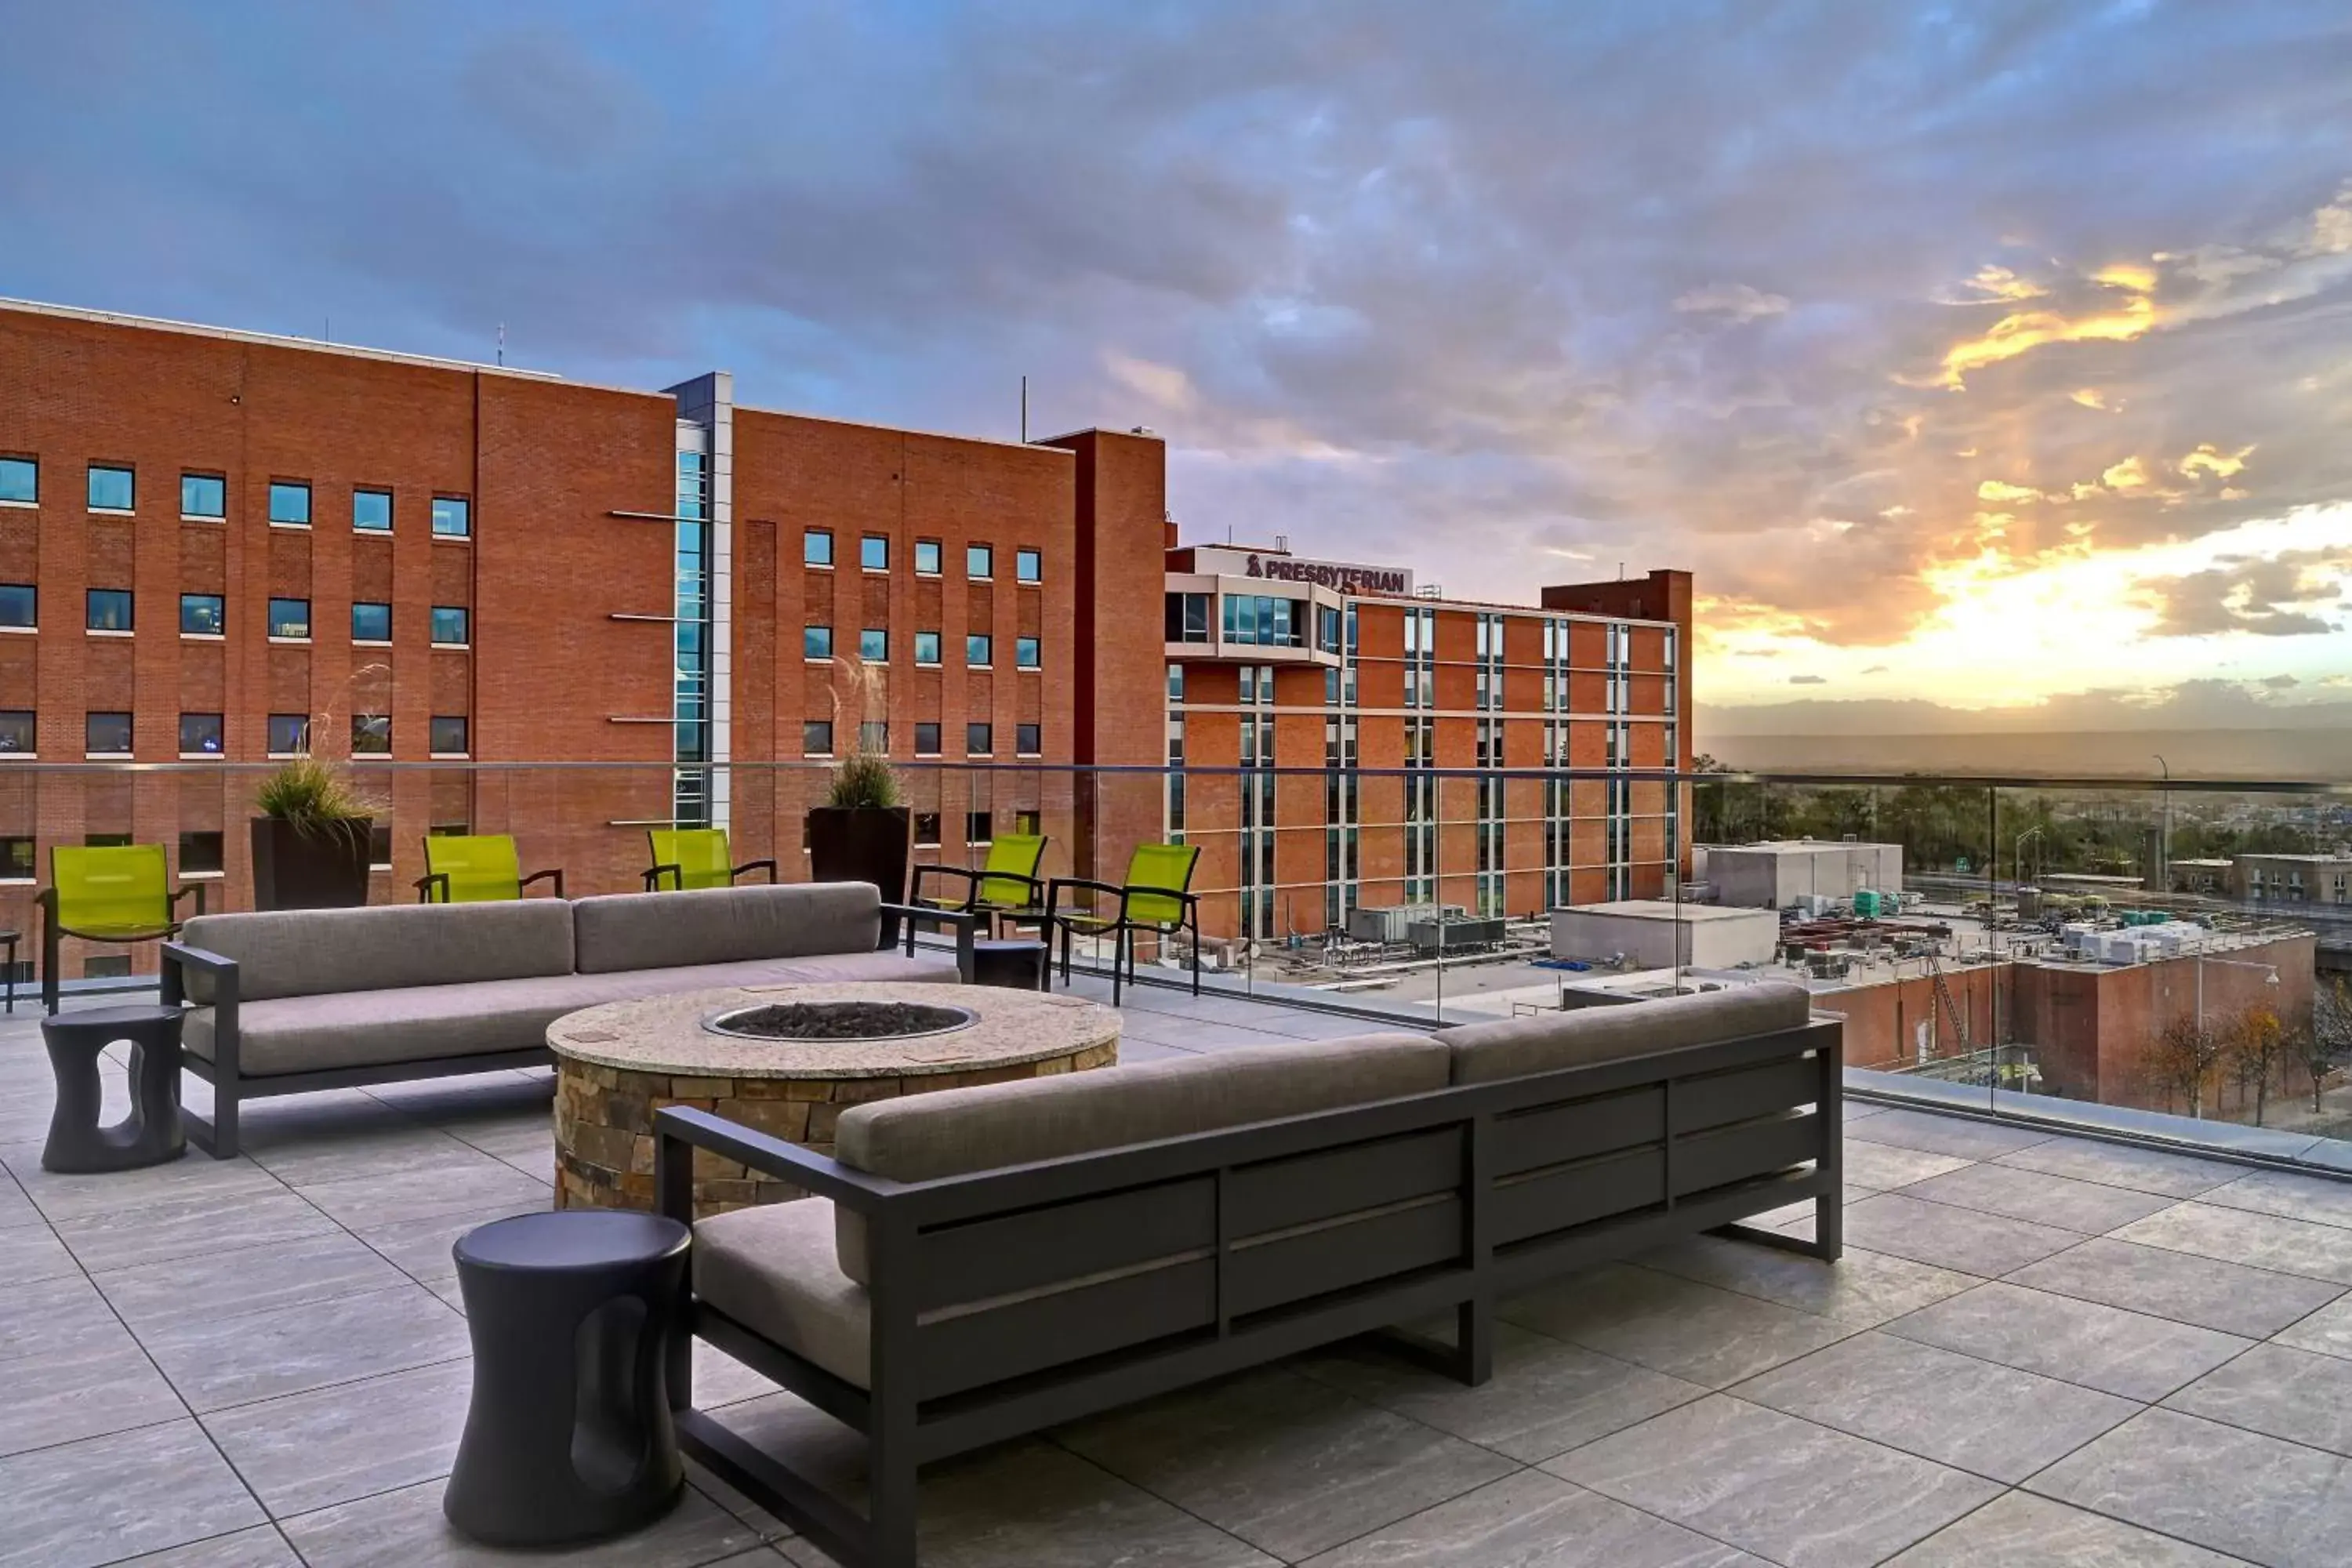 Property Building in SpringHill Suites by Marriott Albuquerque University Area